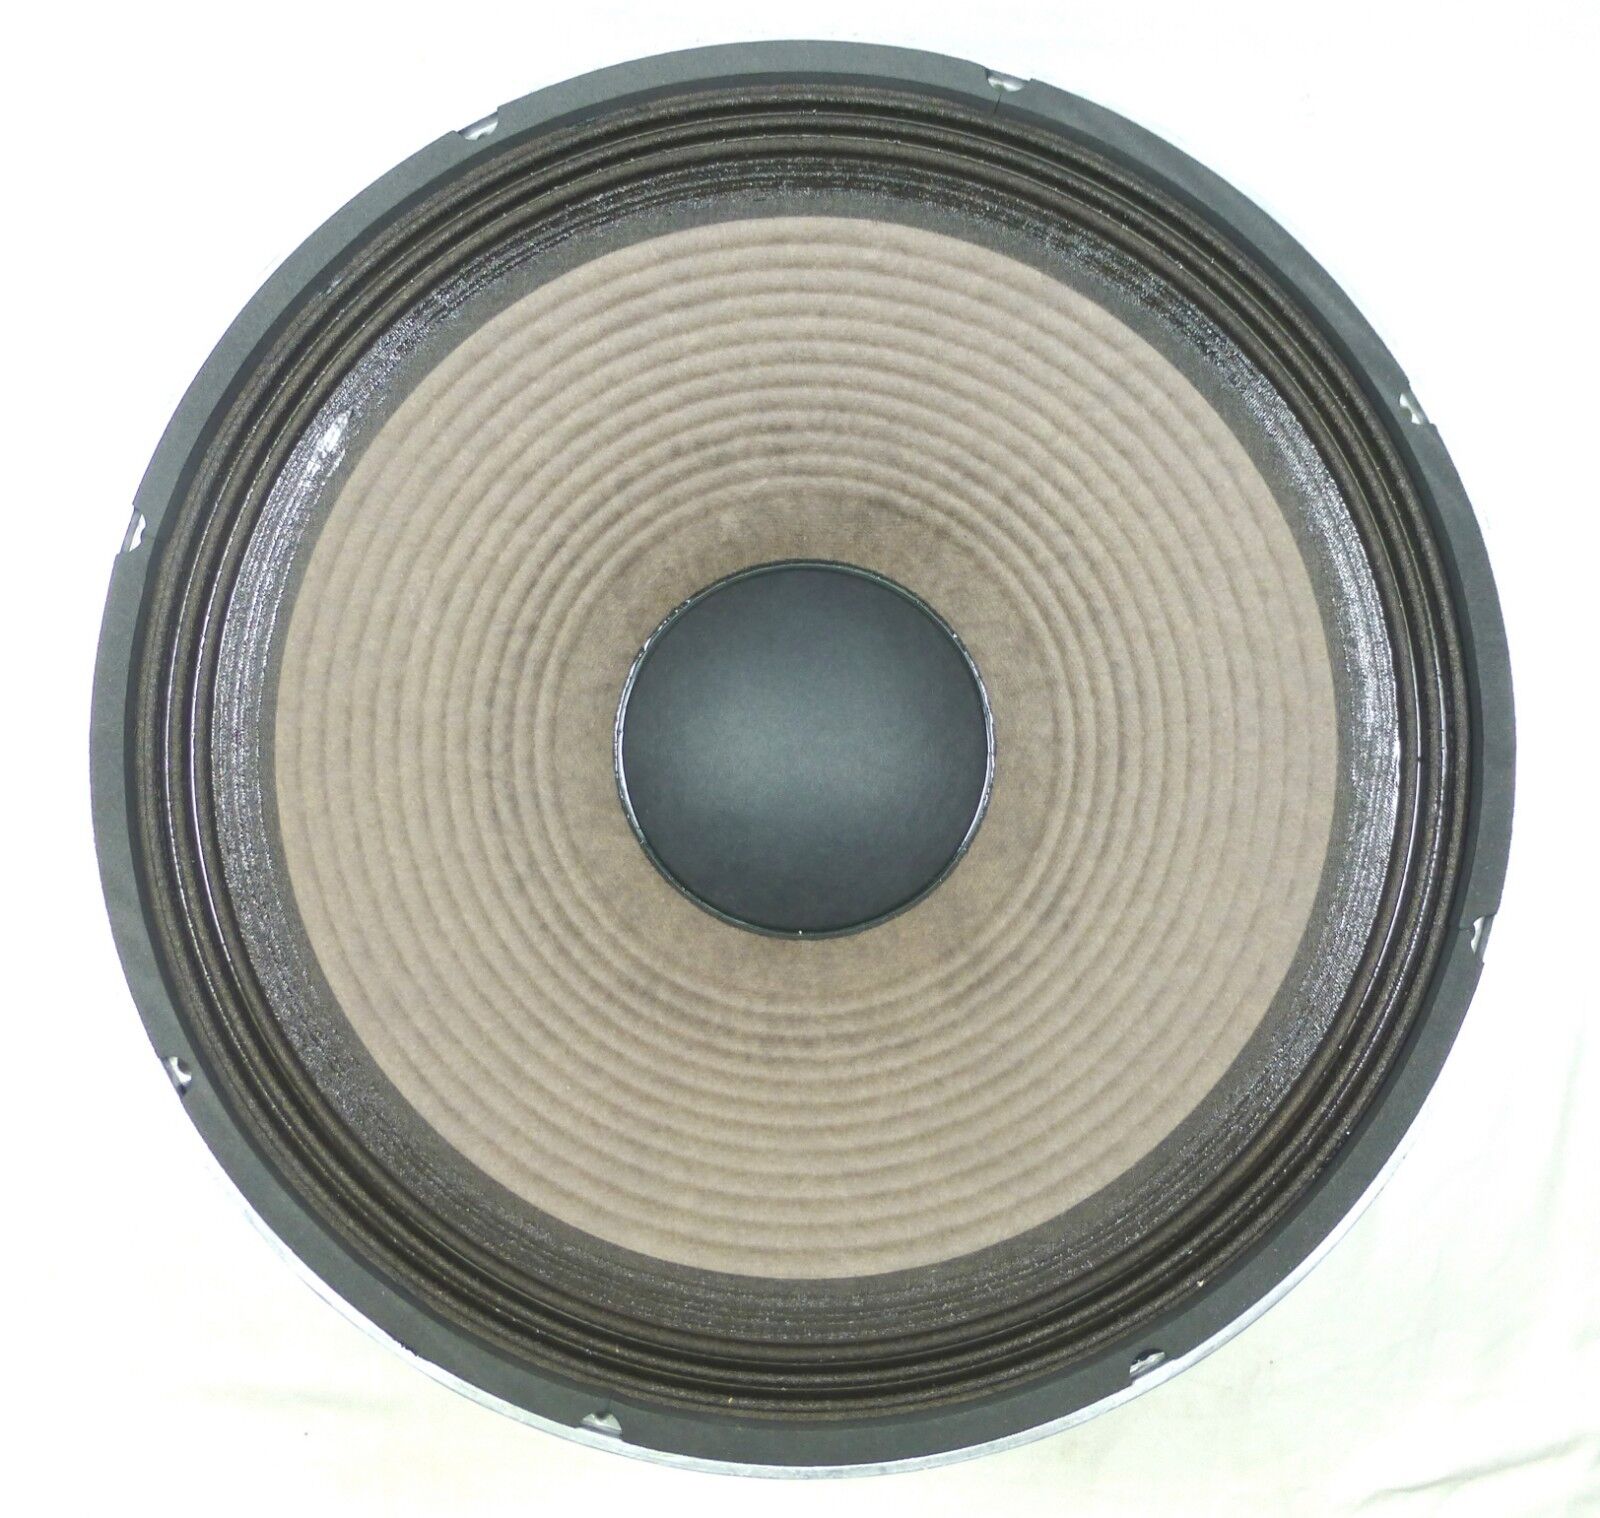 LASE 15" Replacement Woofer for JBL 2265G / VRX915S 4Ω